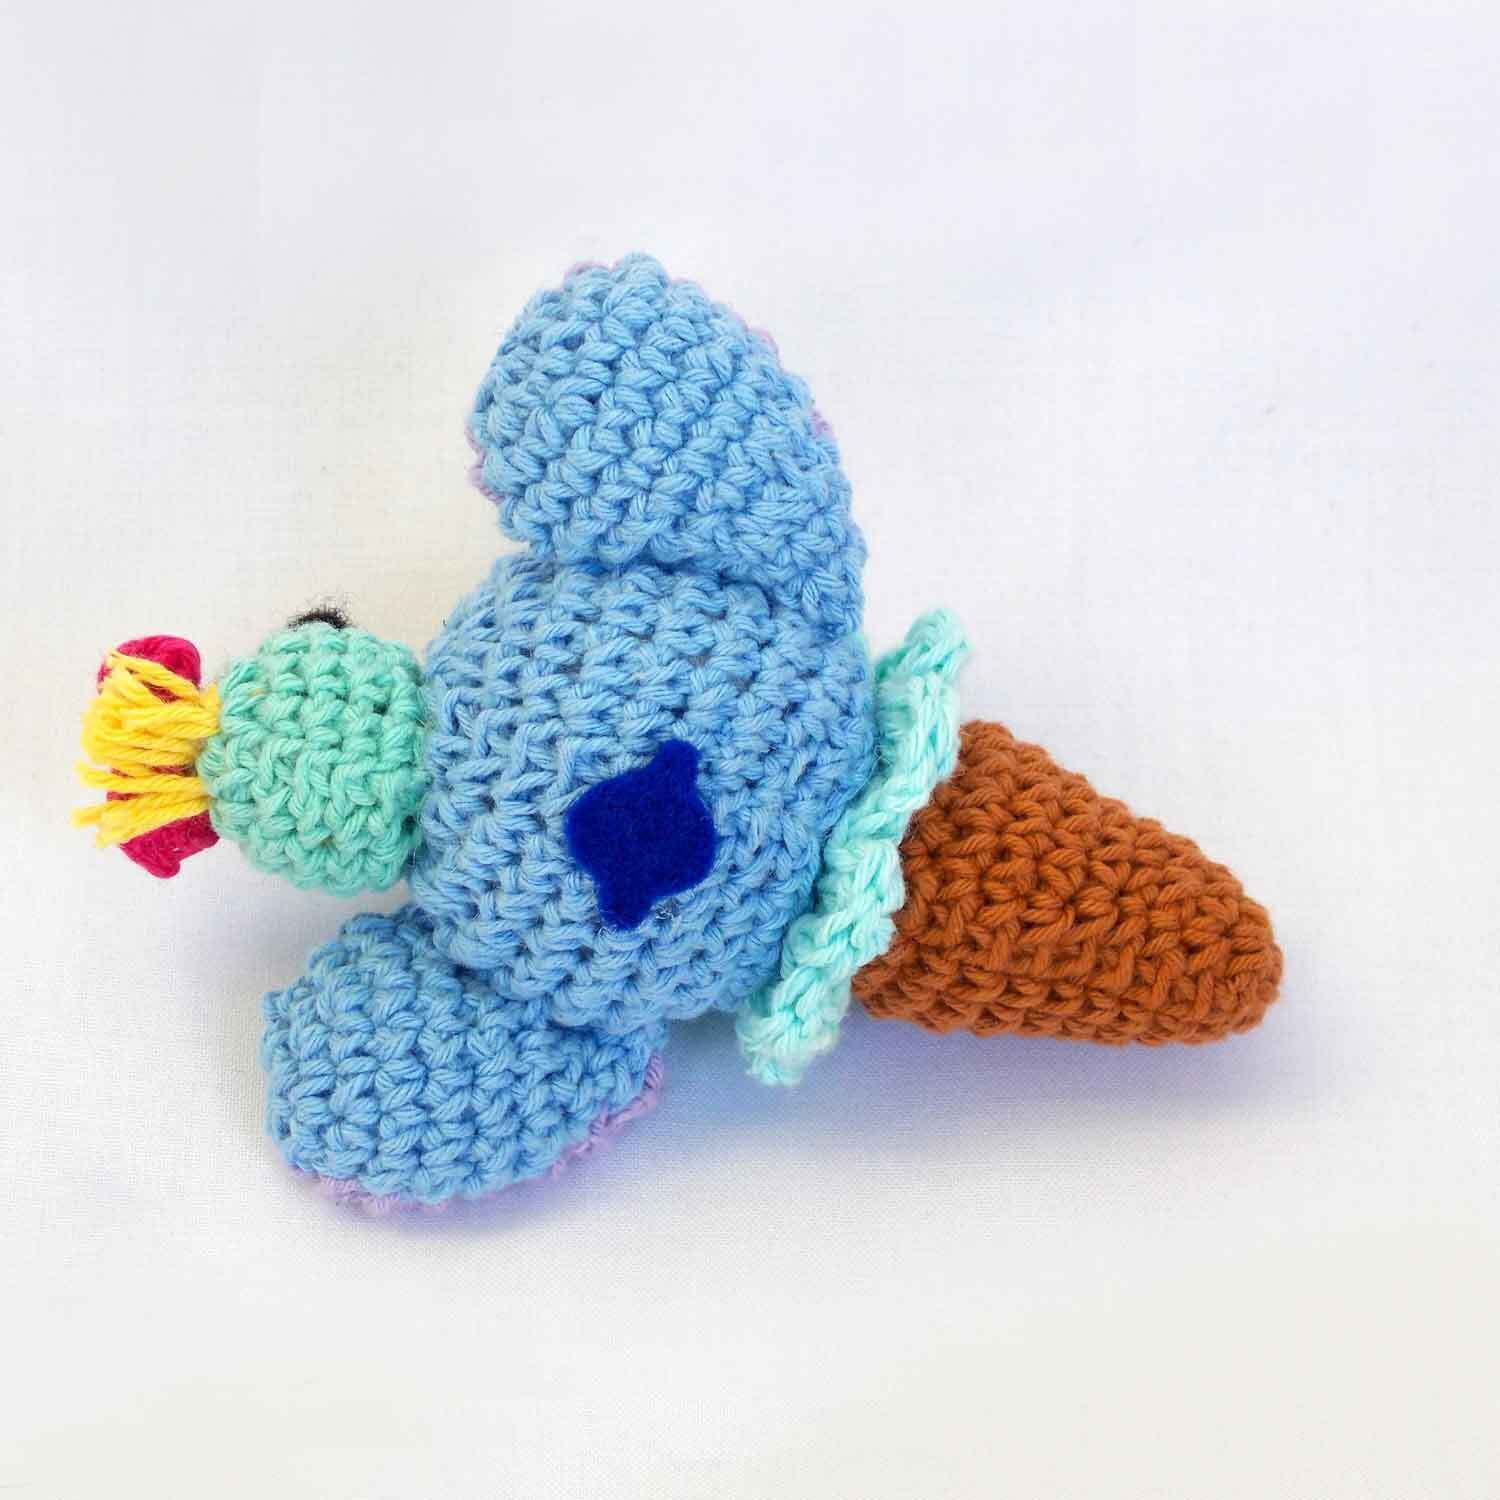 Baby Lilo and Stitch amigurumi crochet pattern - Lenn's Craft amigurumi  crochet pattern's Ko-fi Shop - Ko-fi ❤️ Where creators get support from  fans through donations, memberships, shop sales and more! The